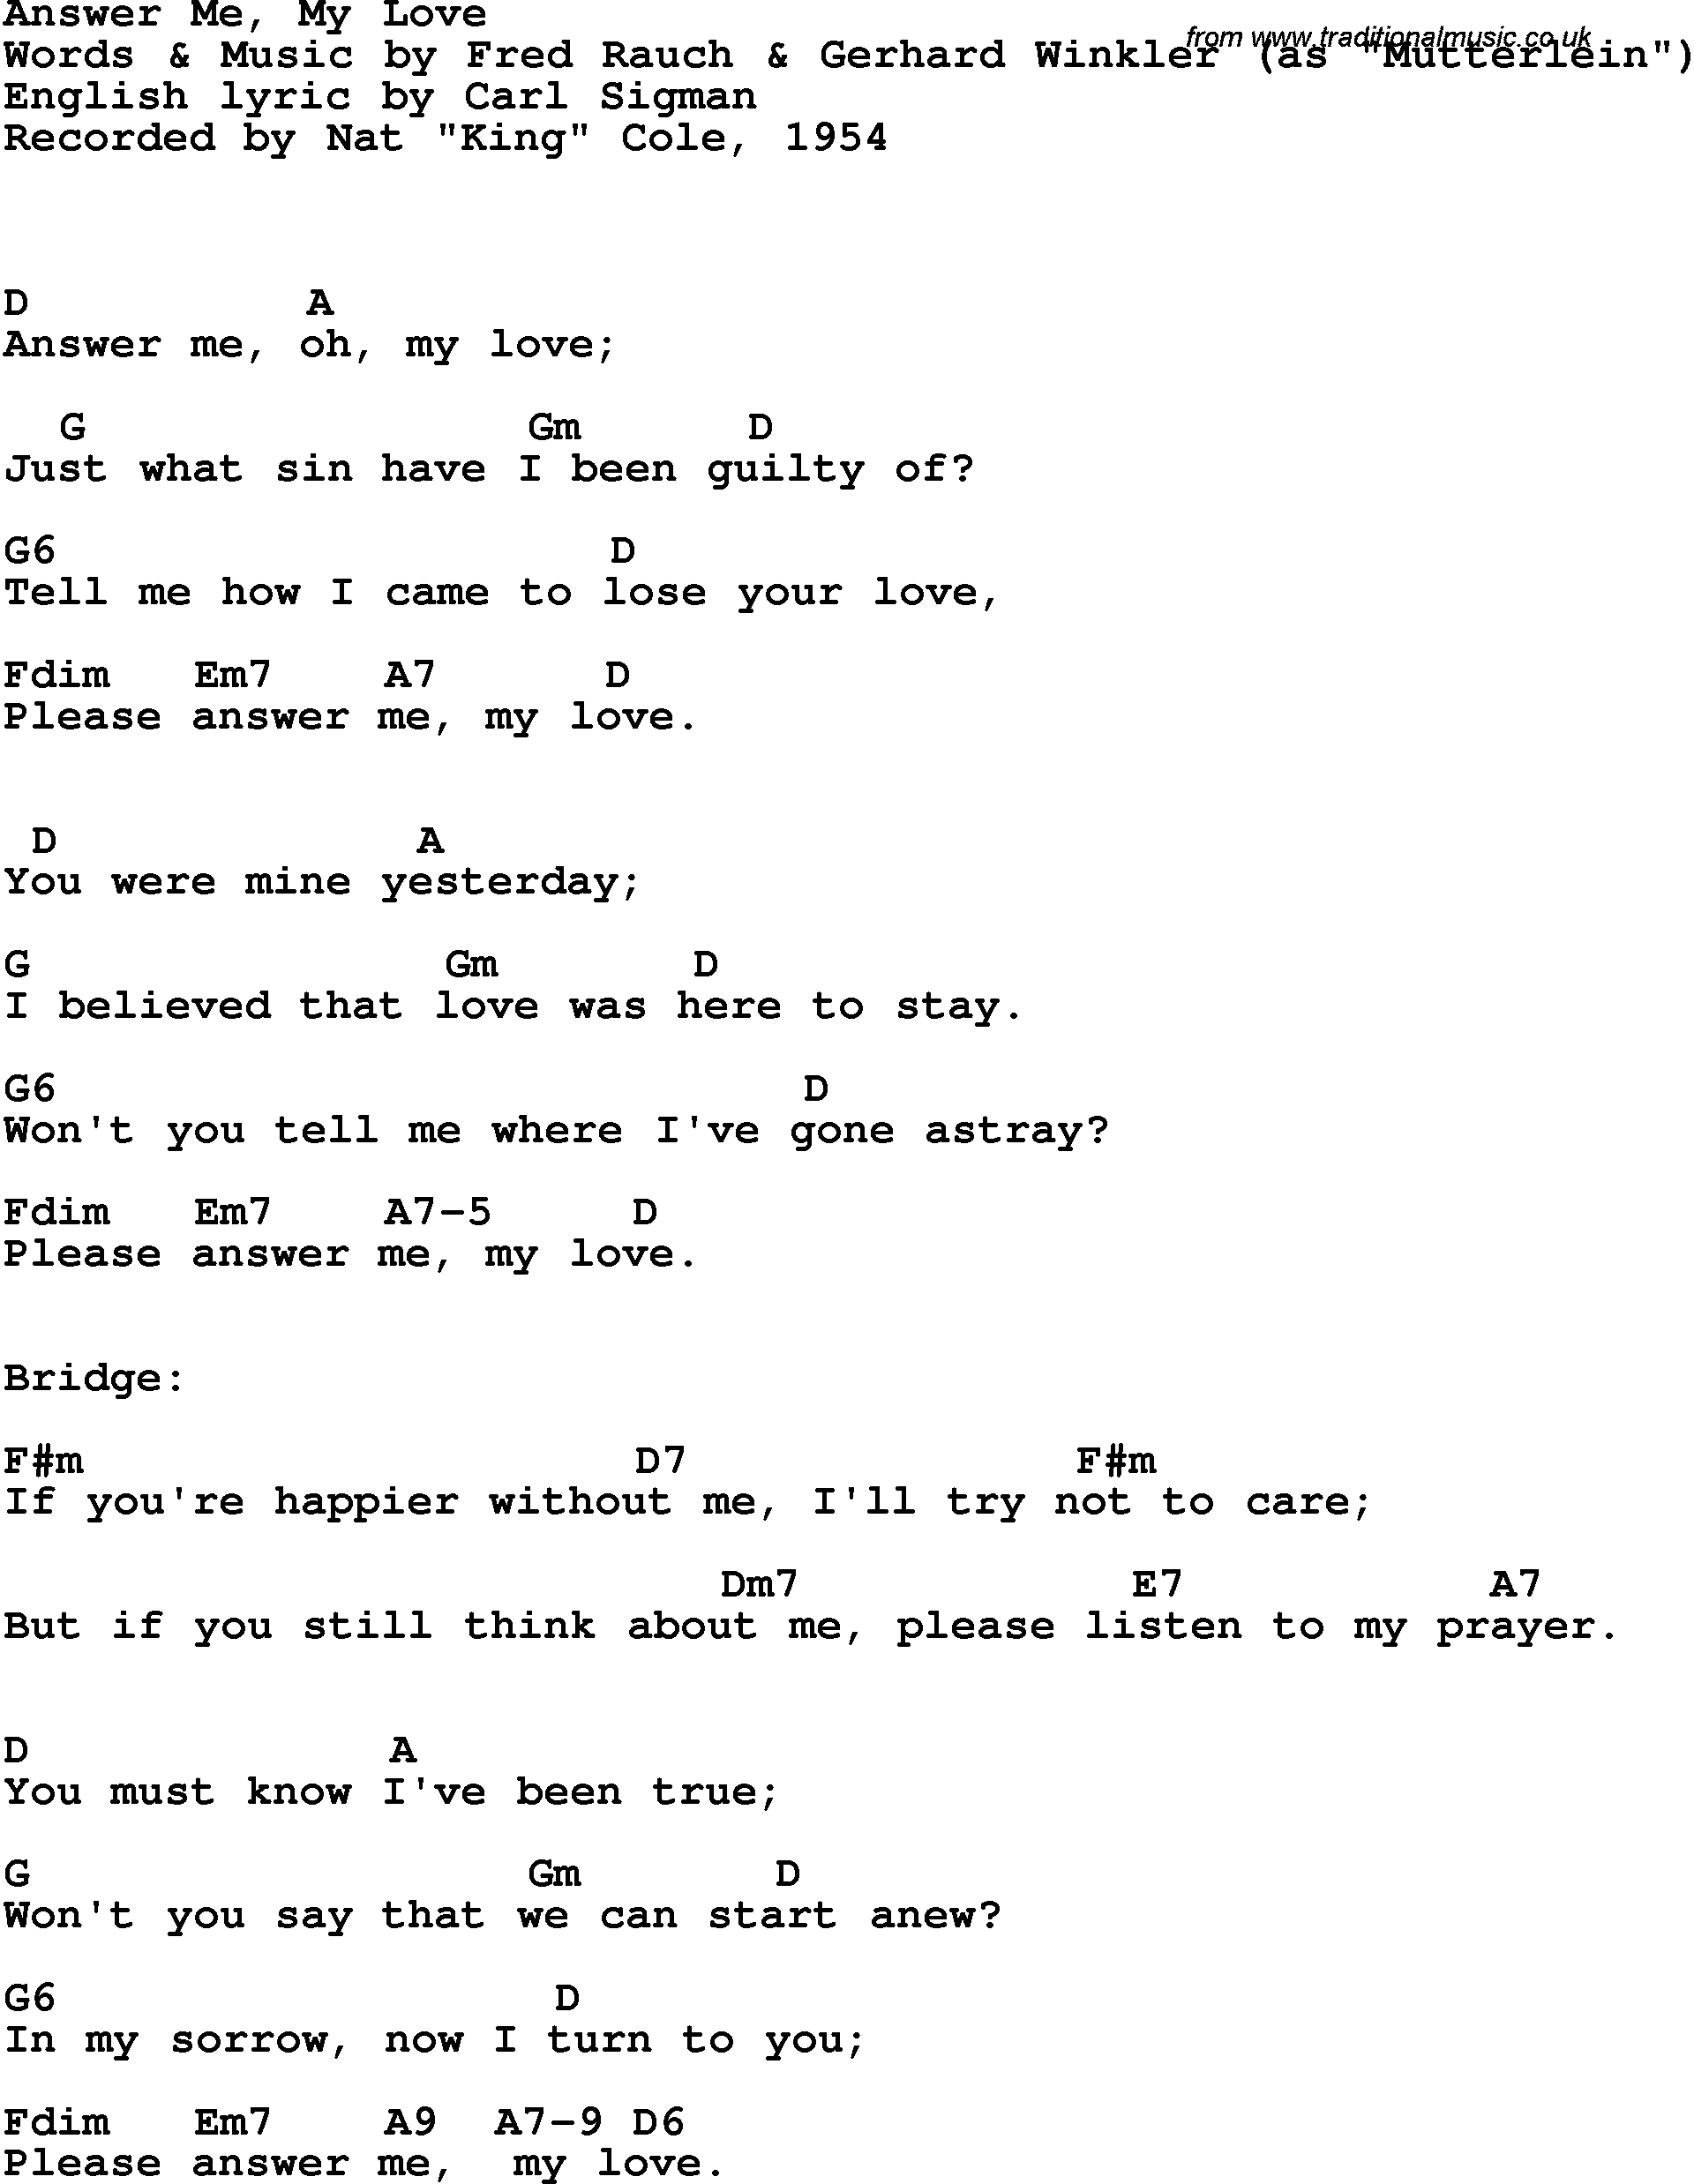 Song Lyrics with guitar chords for Answer Me, My Love - Nat King Cole, 1954